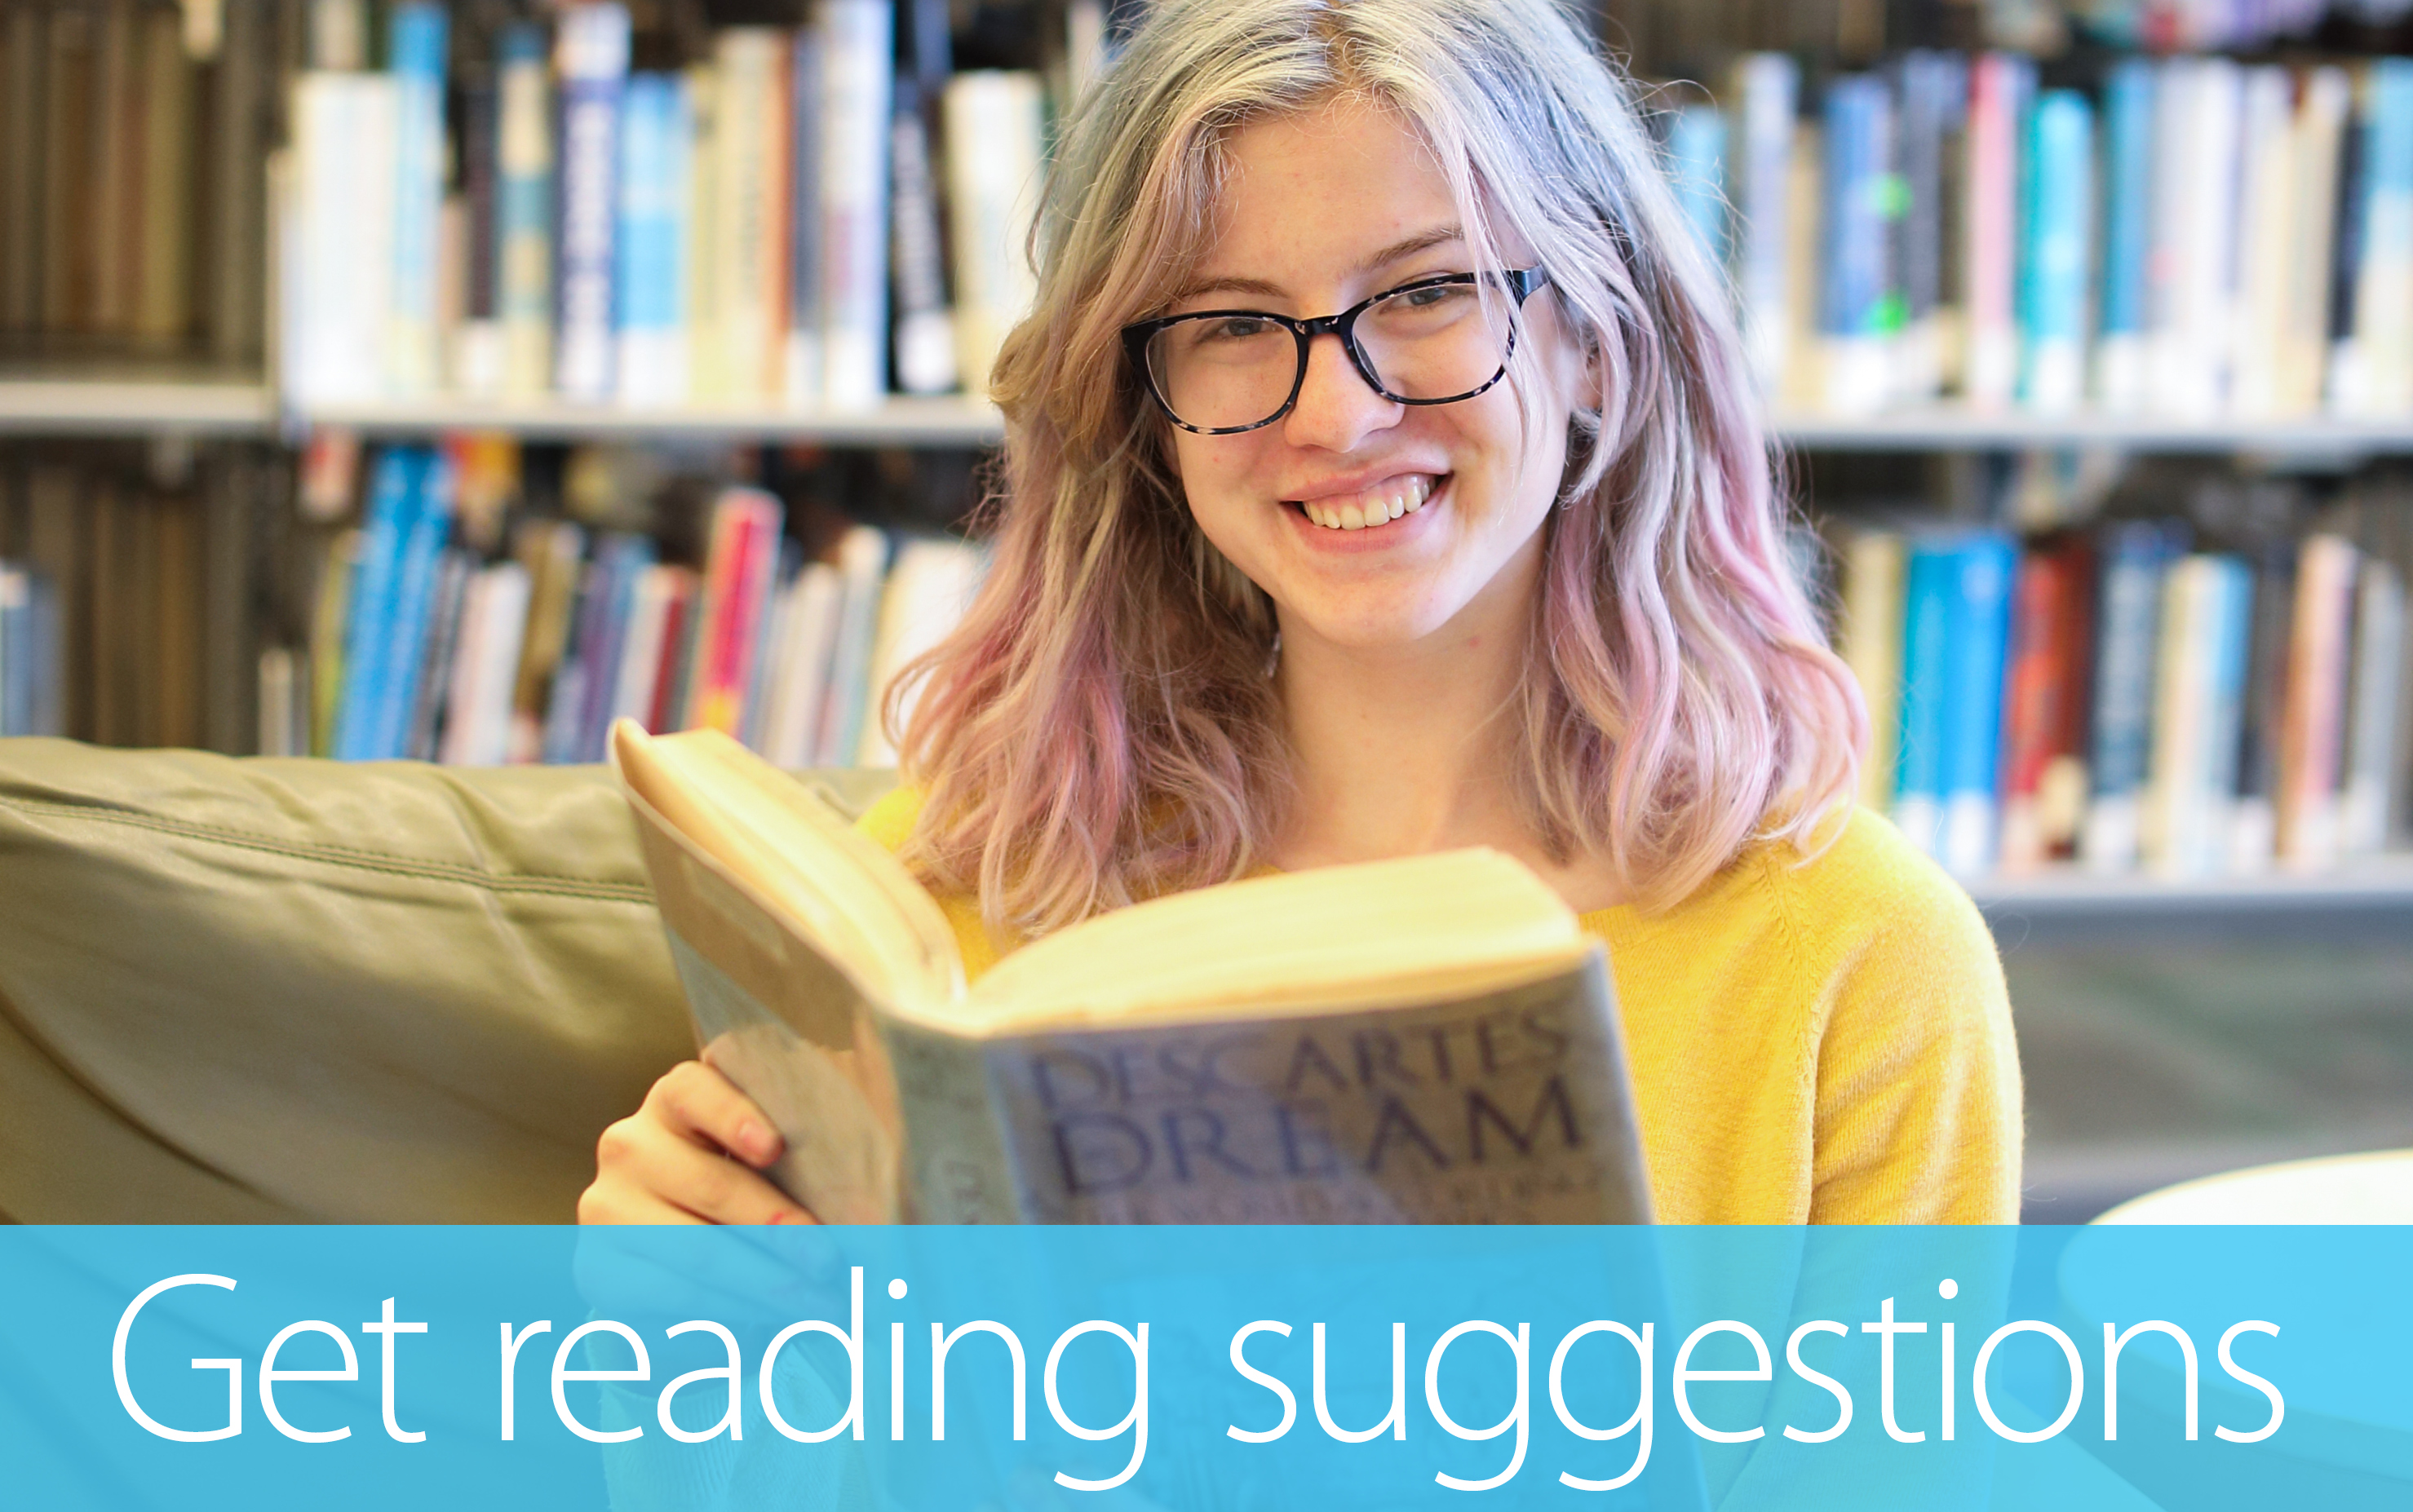 The words "Get reading suggestions" are superimposed over the photo of someone reading. 